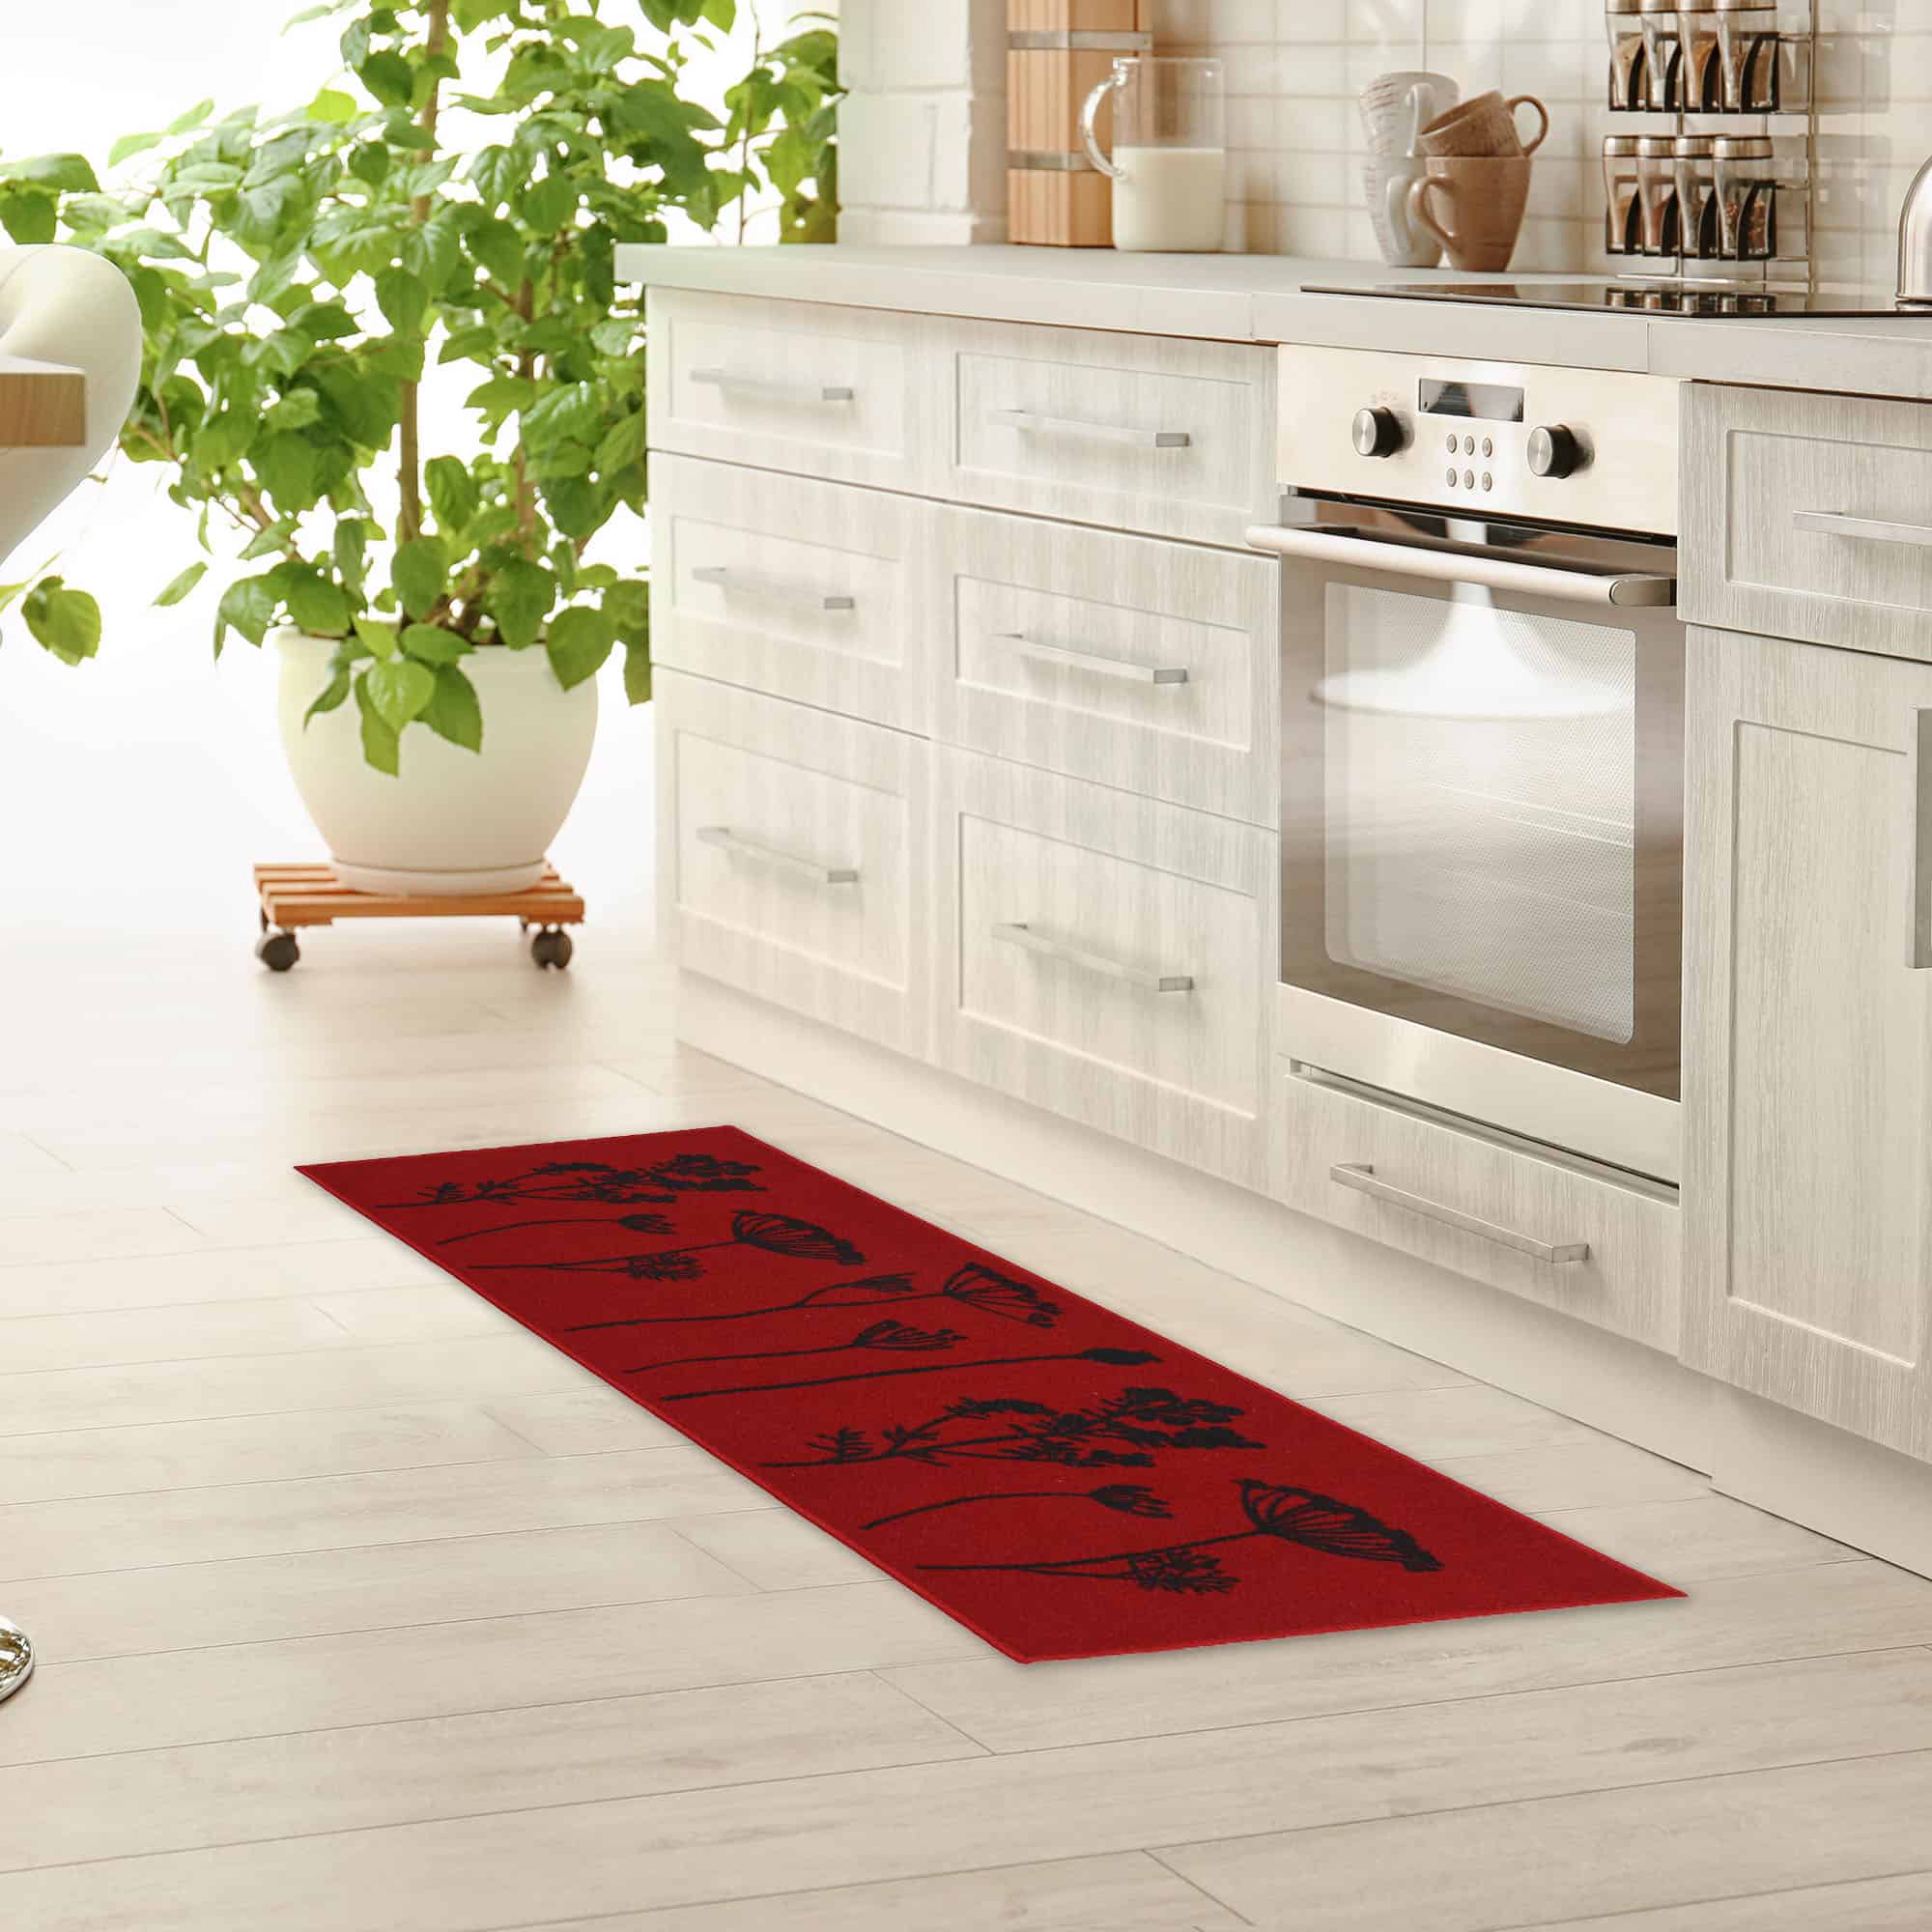 an elegant kitchen with a long runner rug in red with filed flowers design